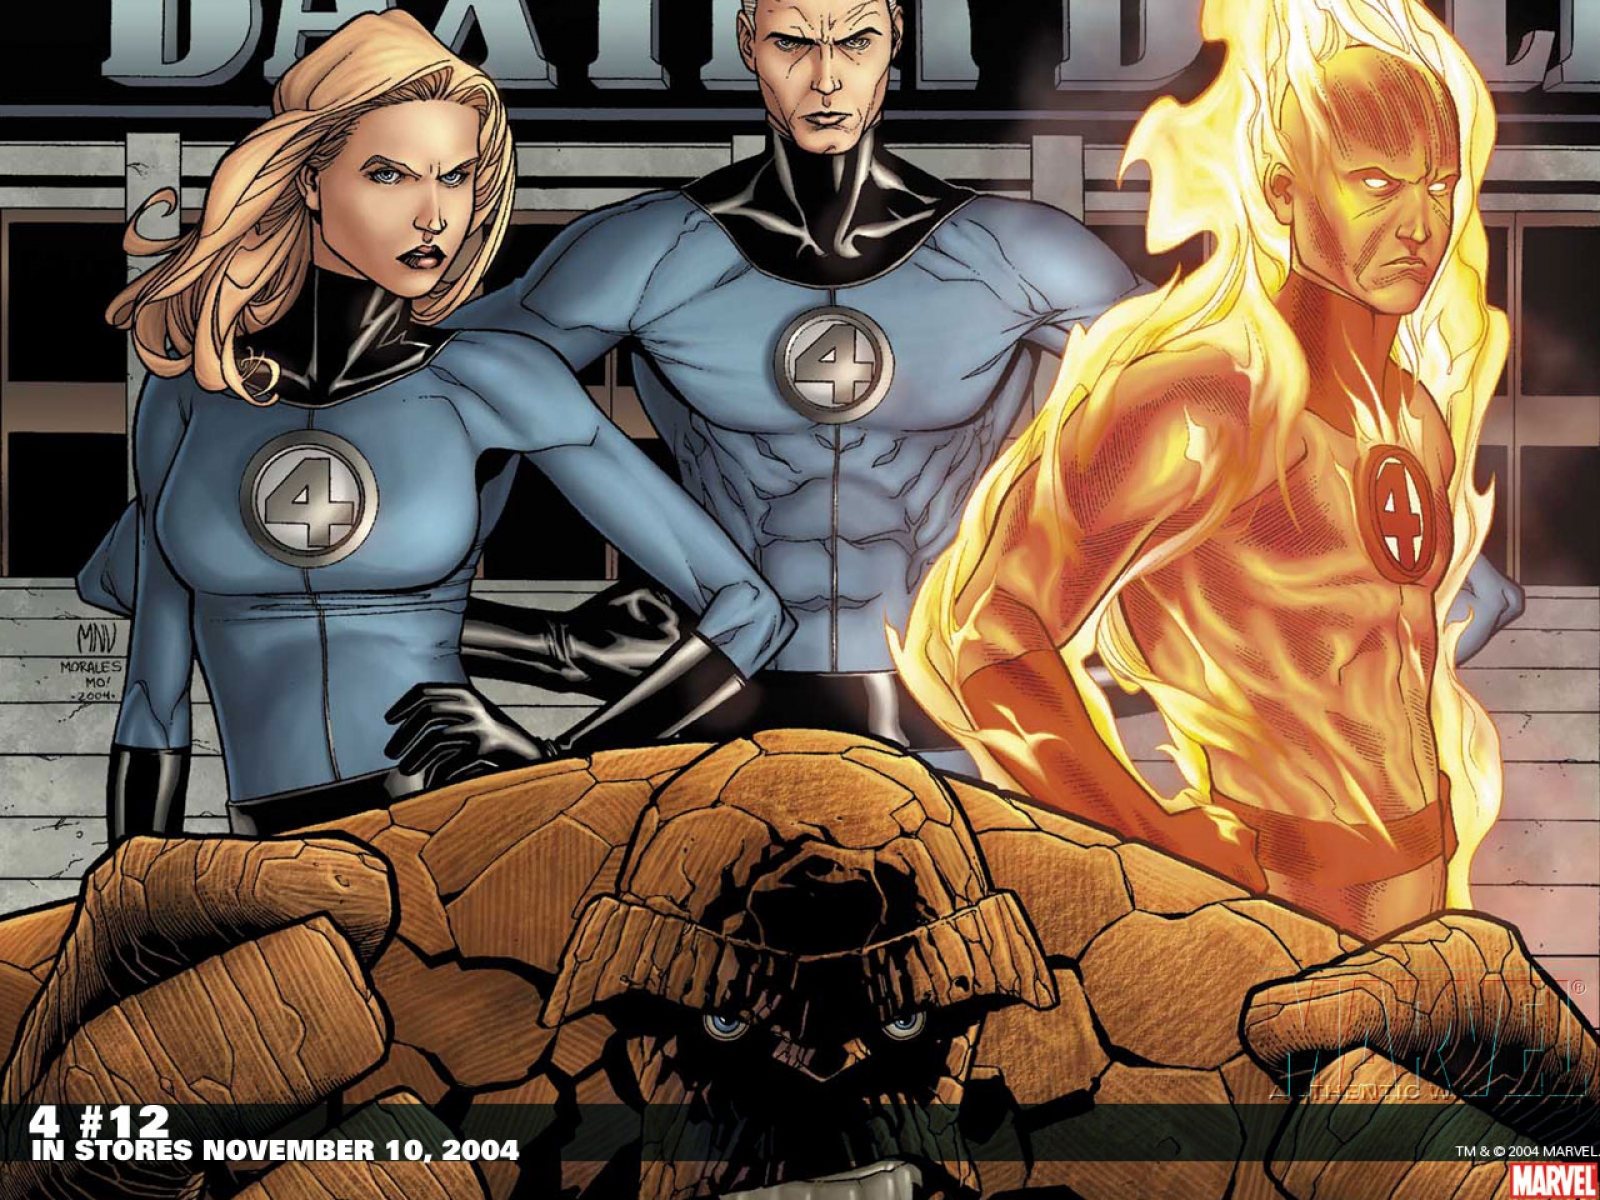 Marvel Comics characters in a group: Thing, Human Torch, Mister Fantastic, Invisible Woman, Doctor Doom, Johnny Storm, Susan Storm, and Ben Gimm